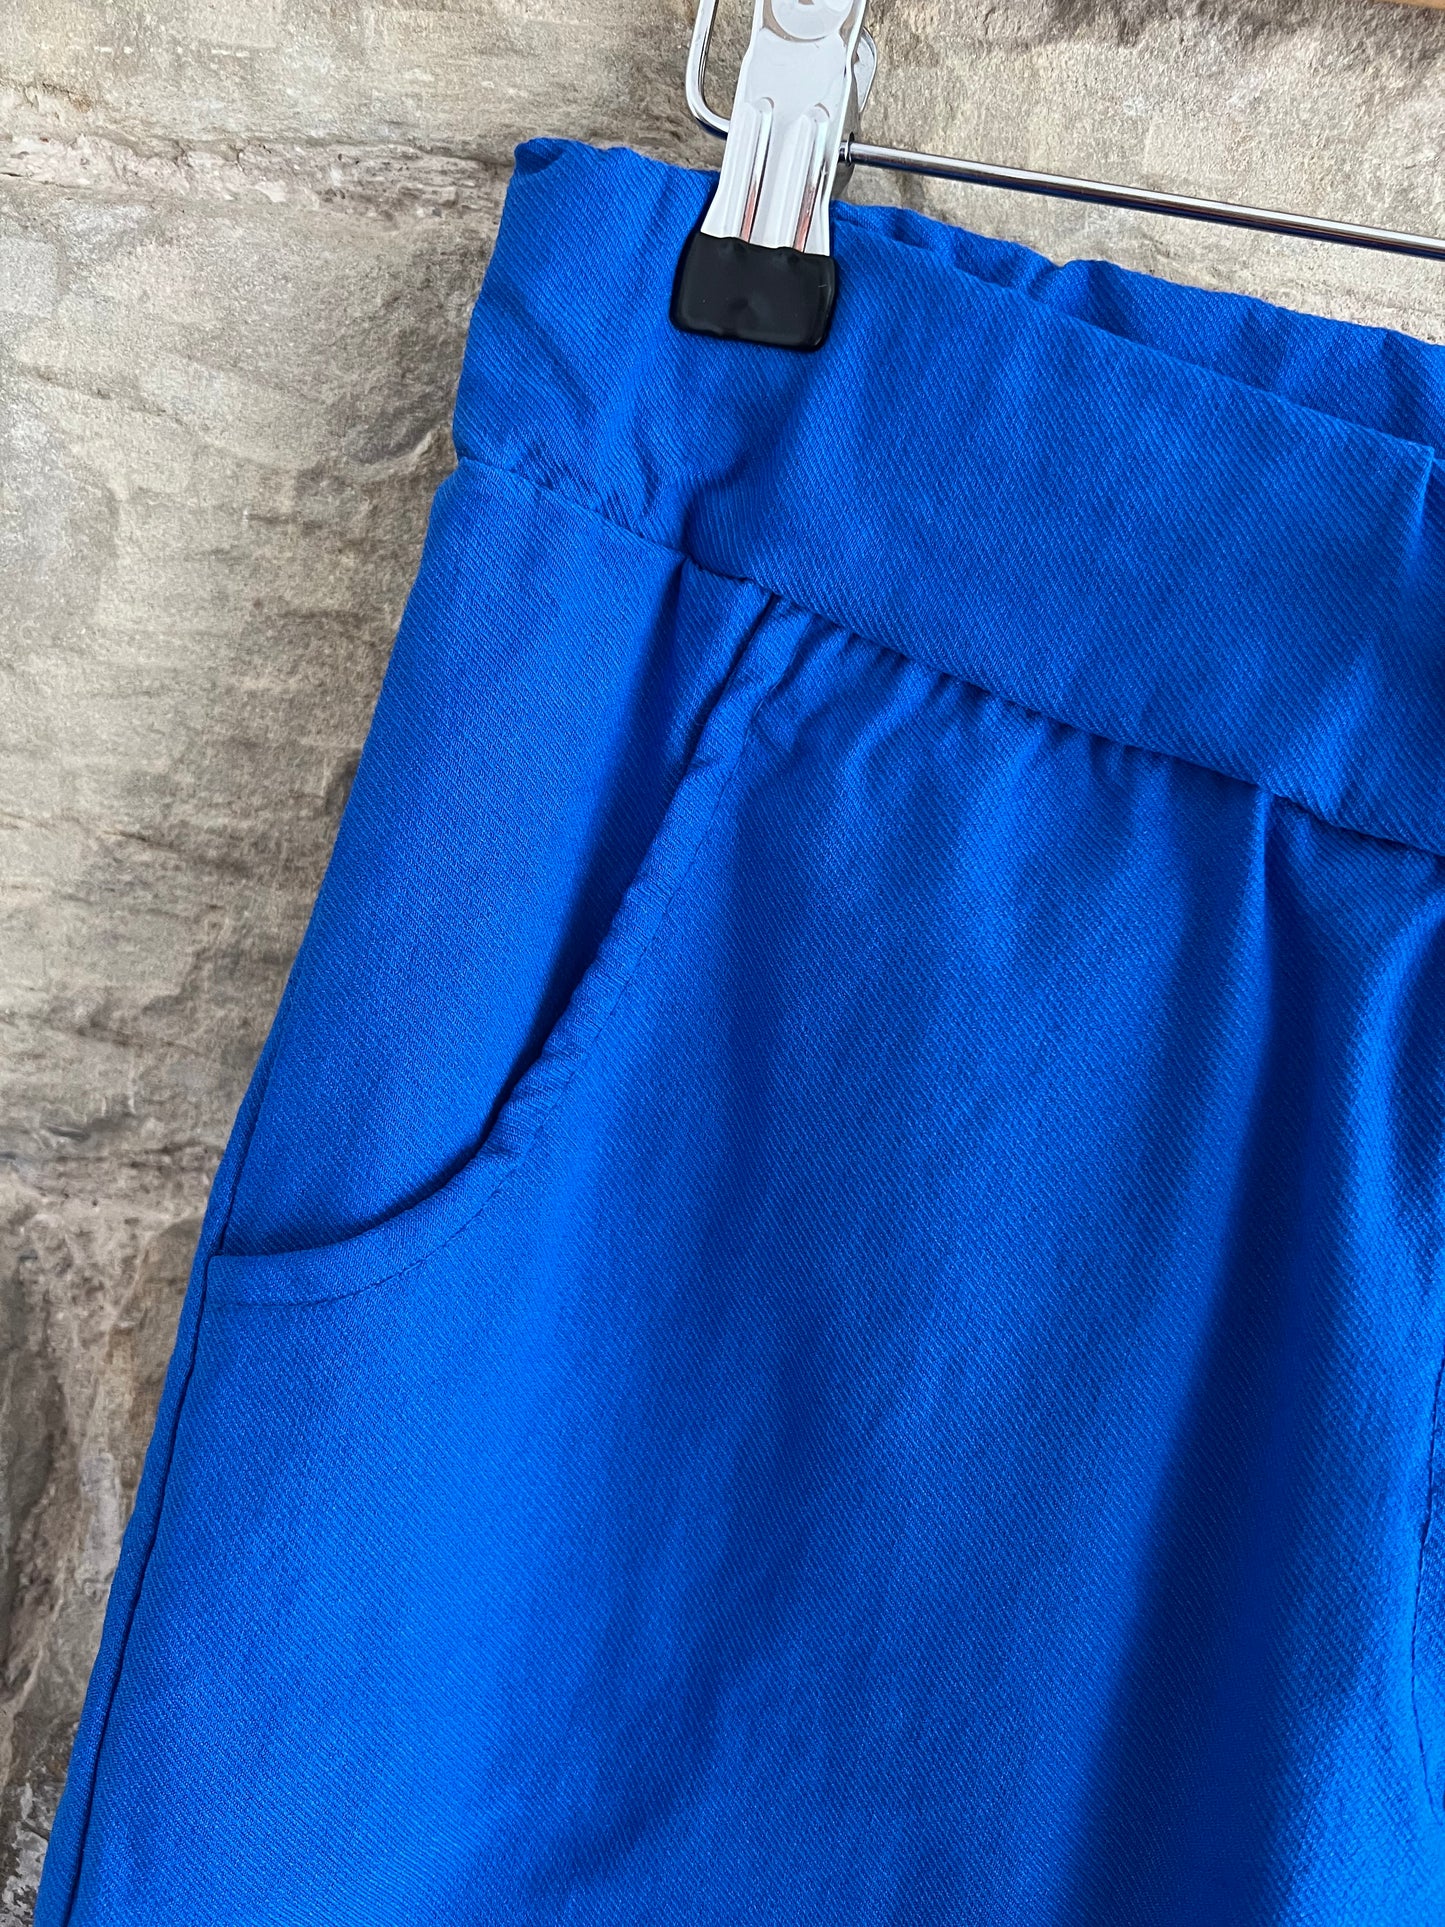 SMOOTH Magic Trousers - WRINKLE FREE - 2 Sizes - Royal Blue